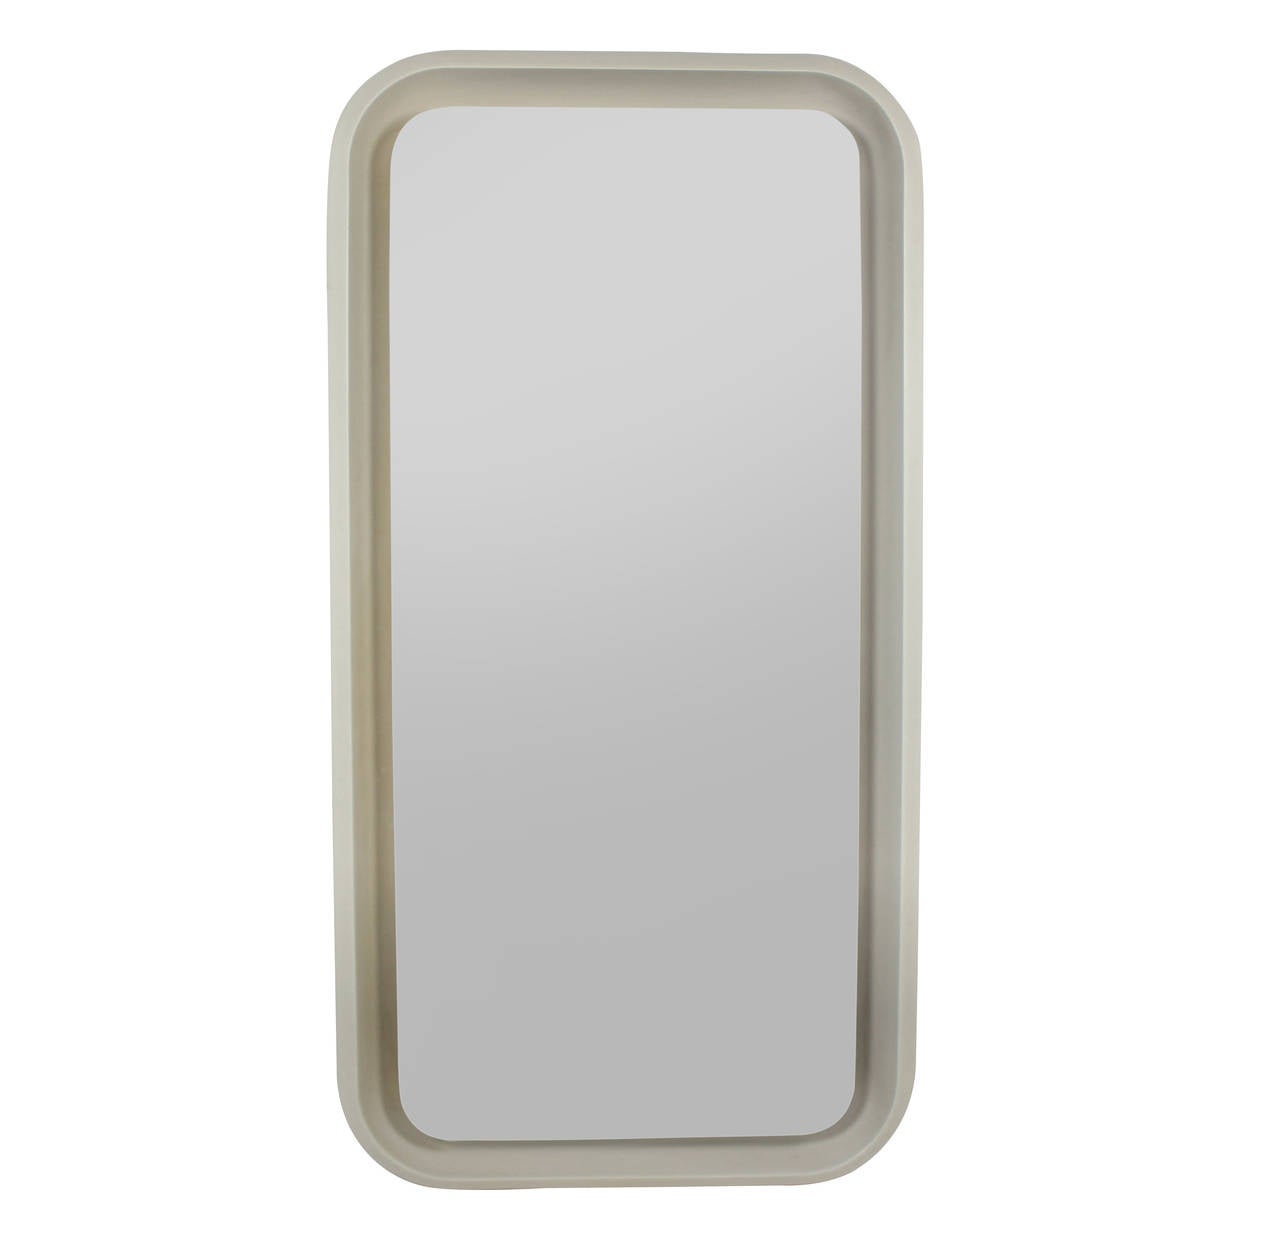 A large Italian mirror which has a pale grey moulded frame with a floating mirror plate with a light behind.